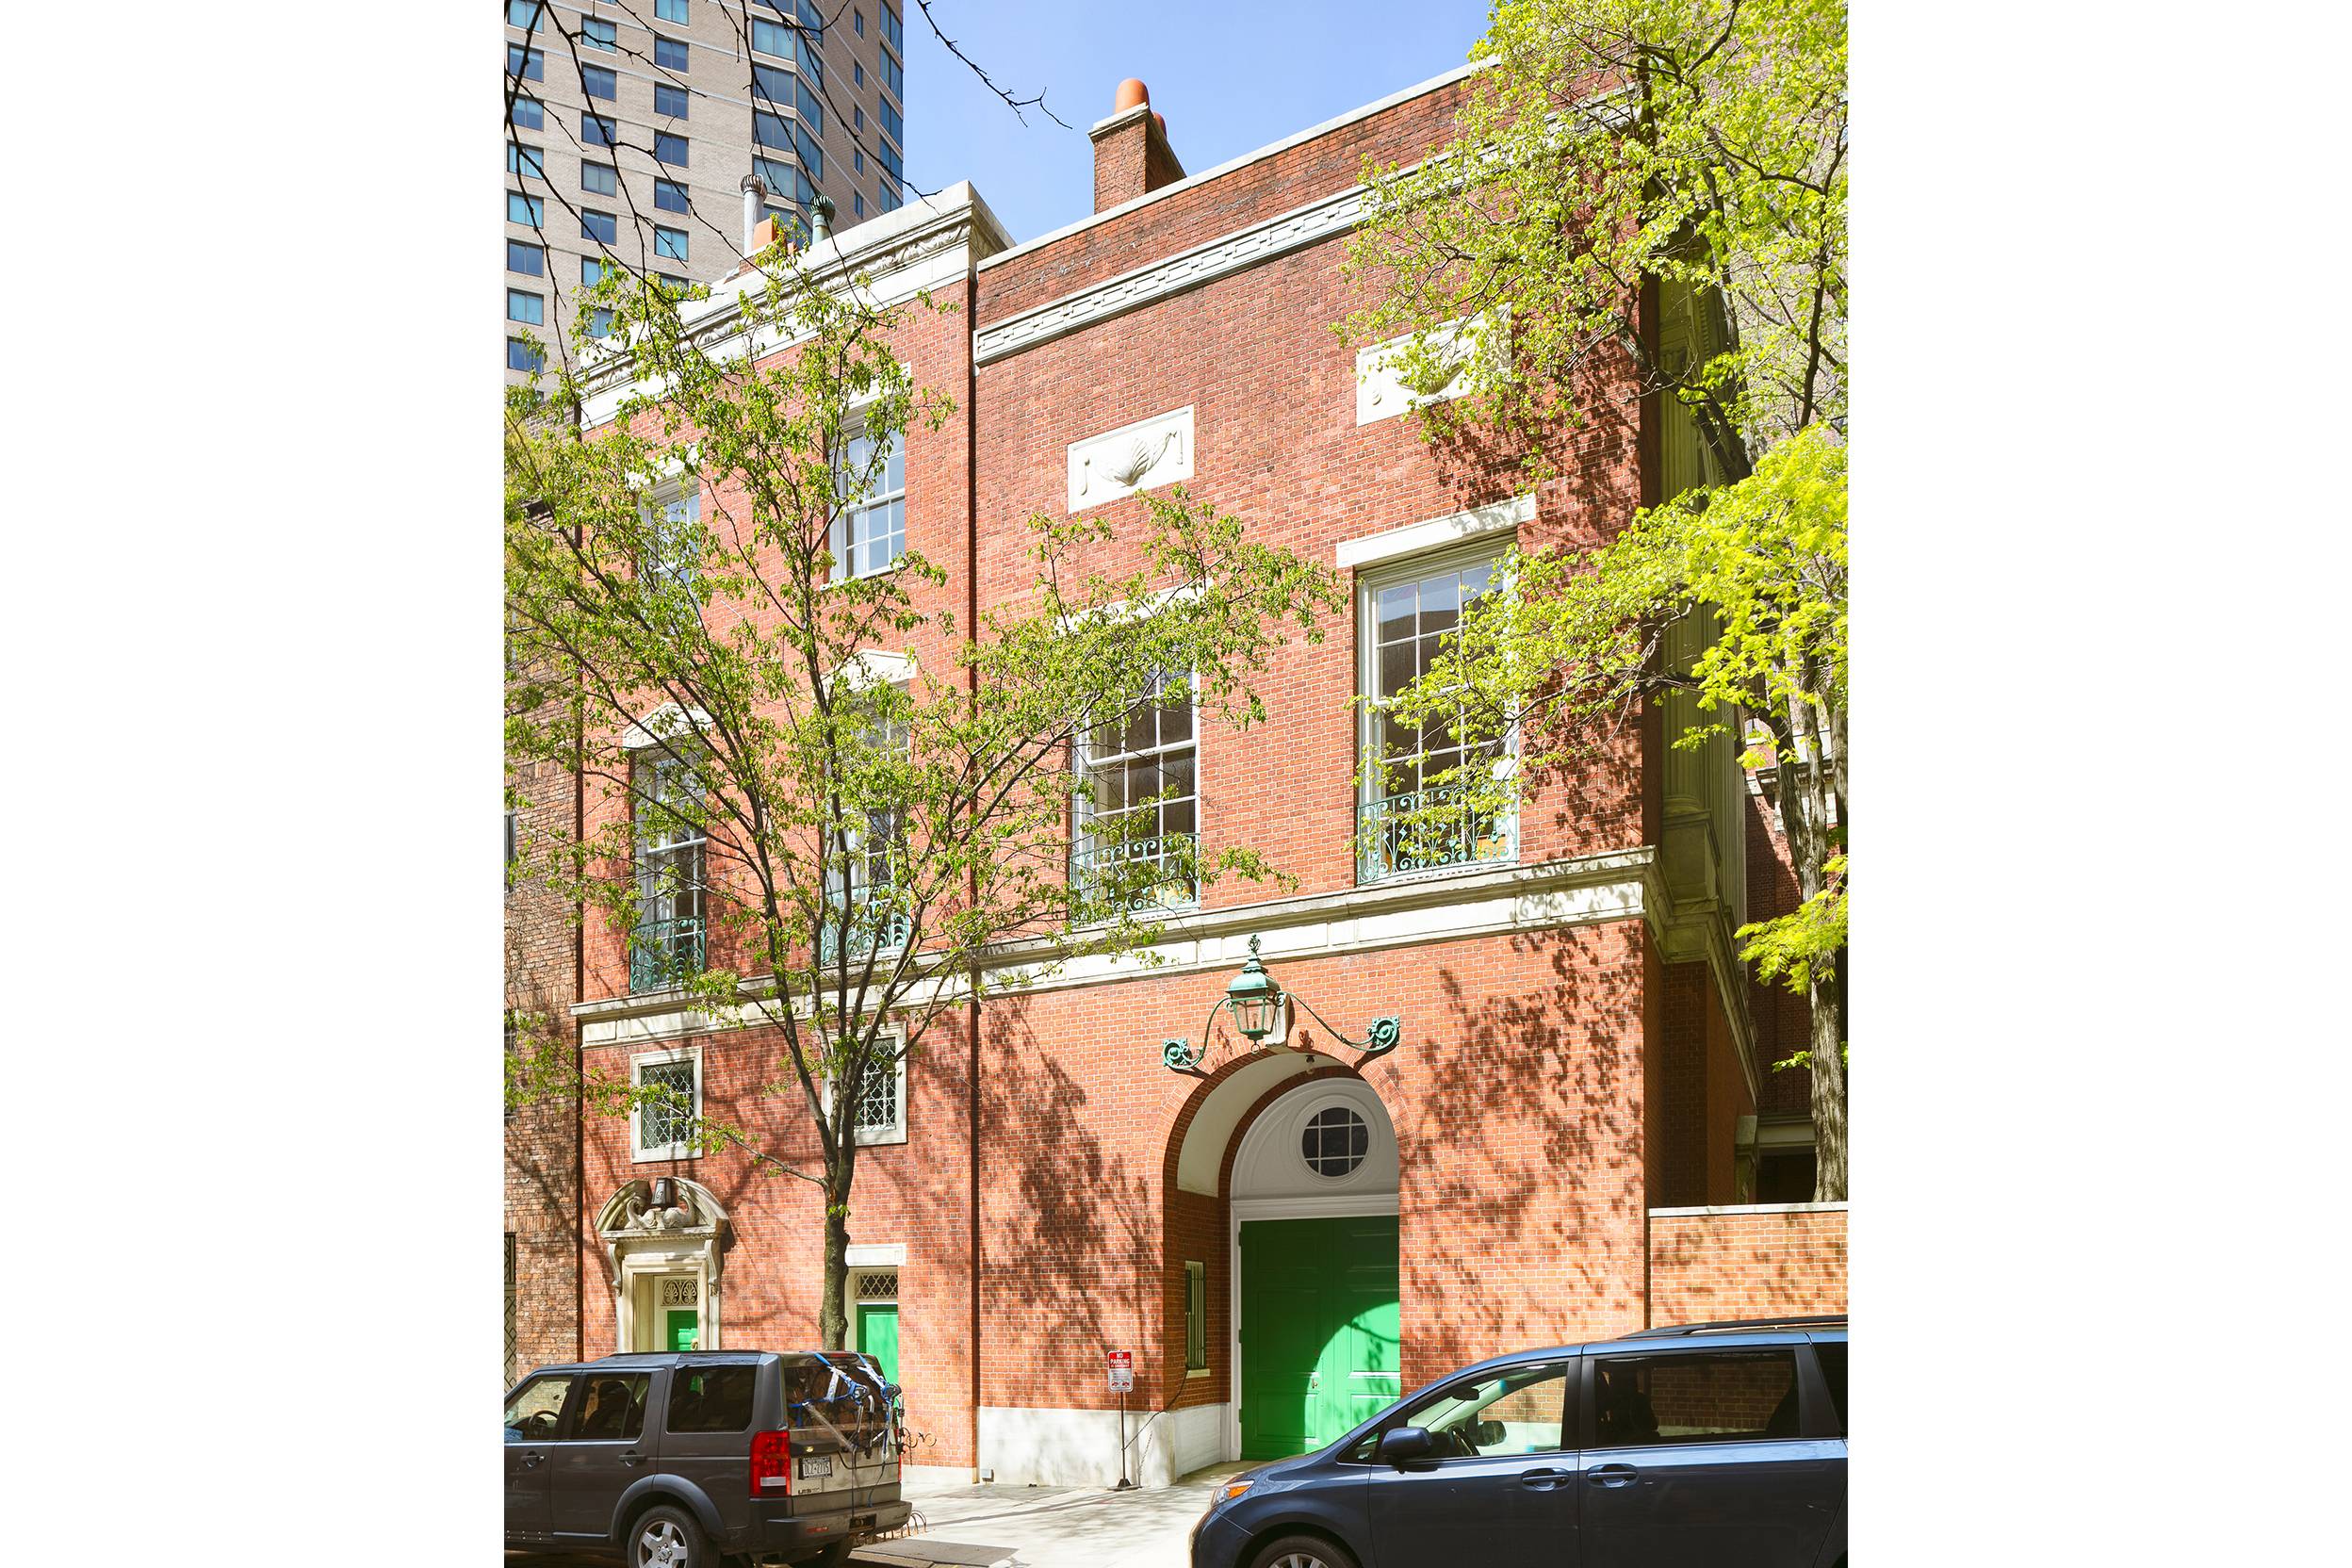 Offered for sale for the first time together are two sophisticated and landmarked townhouses designed by the renowned architectural firm of Delano amp ; Aldrich, and once owned by prominent ...